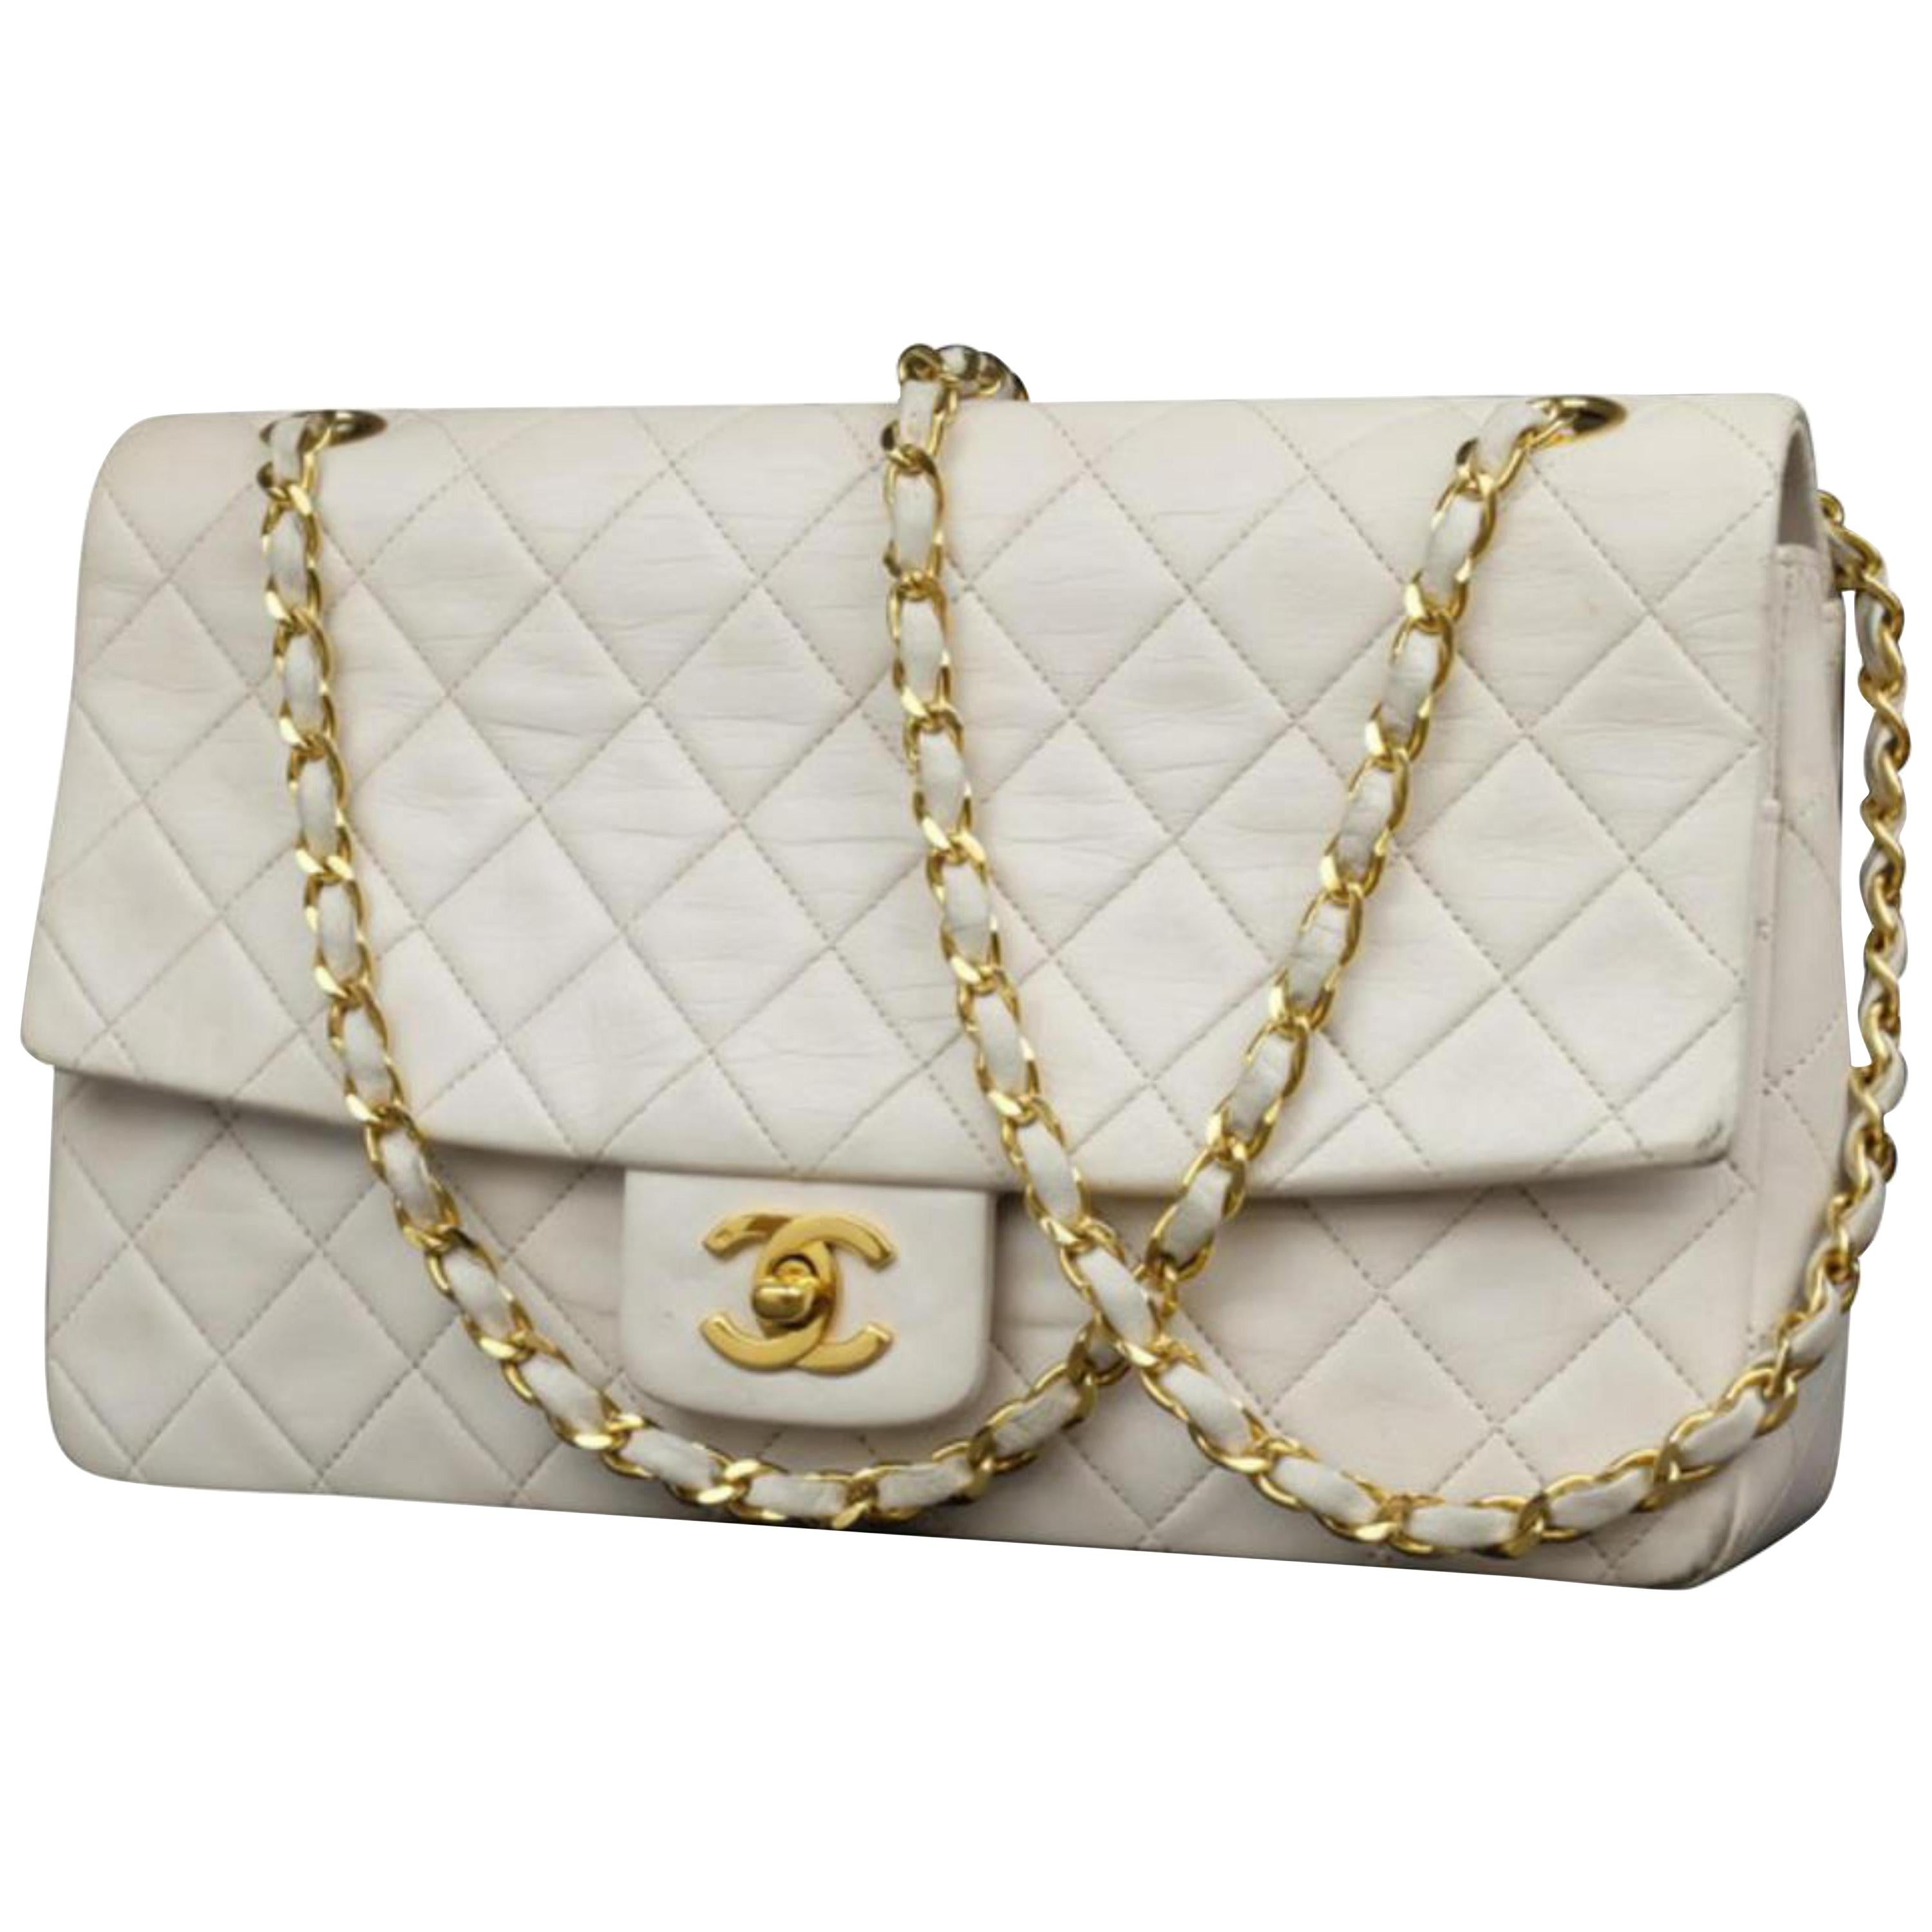 Chanel Classic Flap Quilted Medium 228478 White Leather Shoulder Bag For Sale